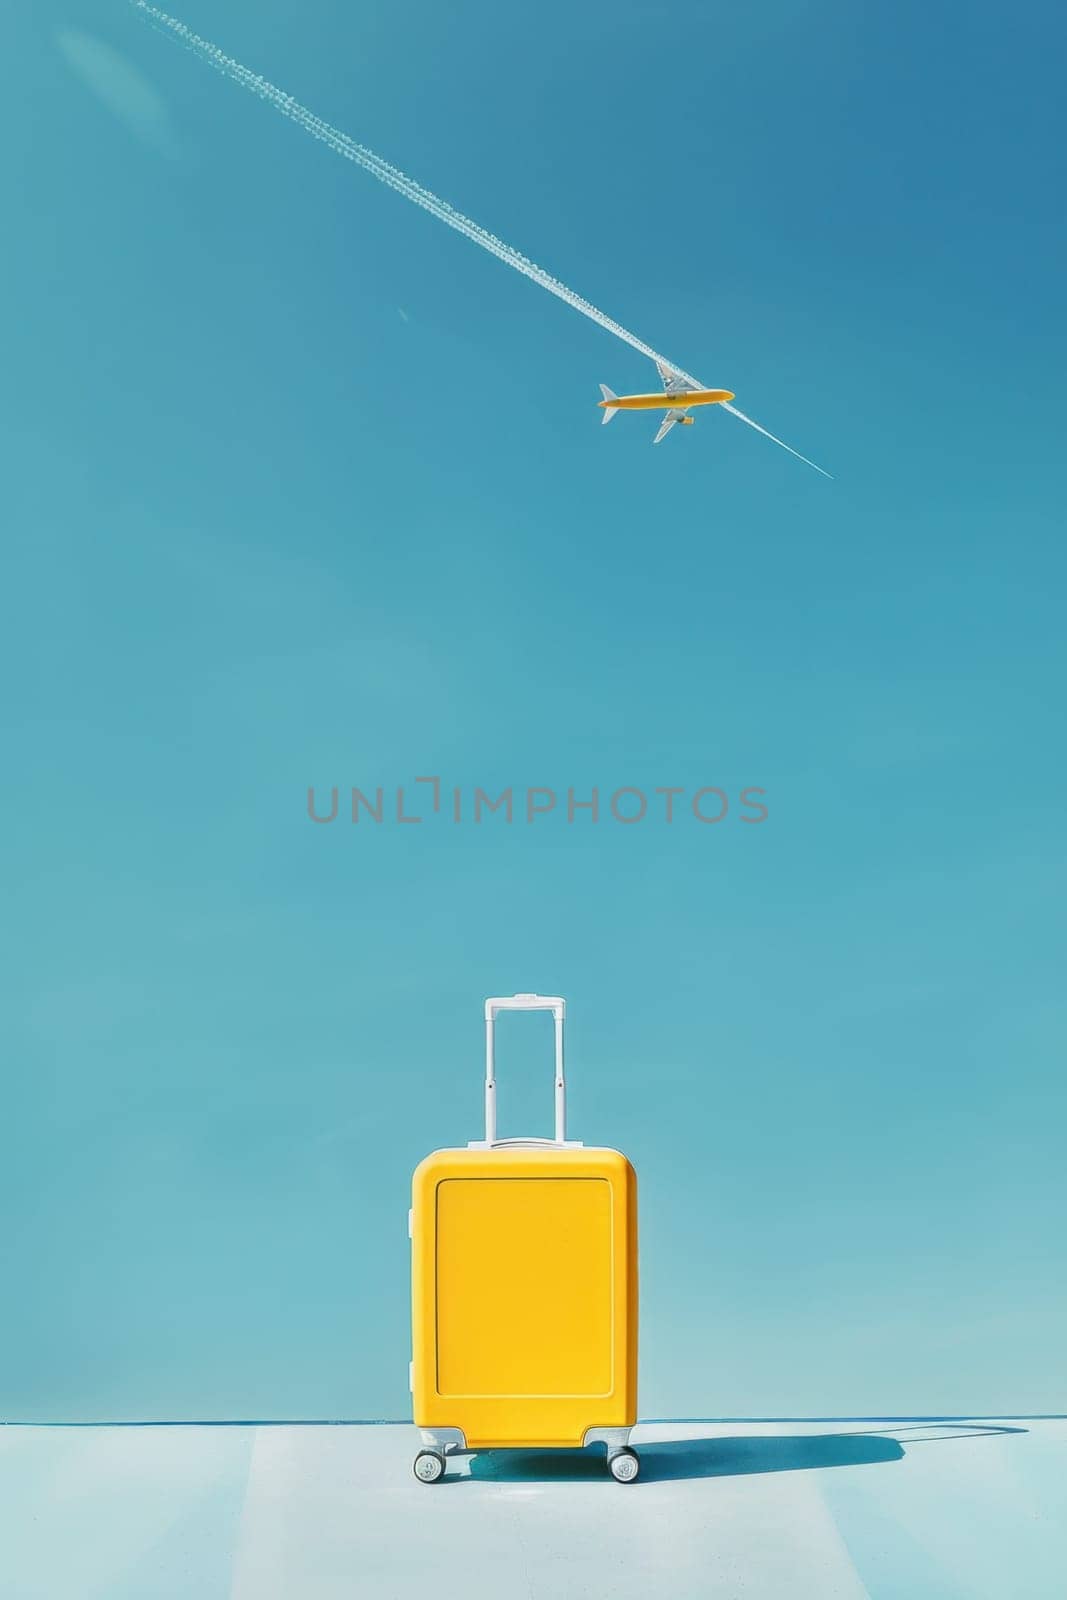 Traveling in style yellow suitcase on blue surface with airplane flying overhead in background